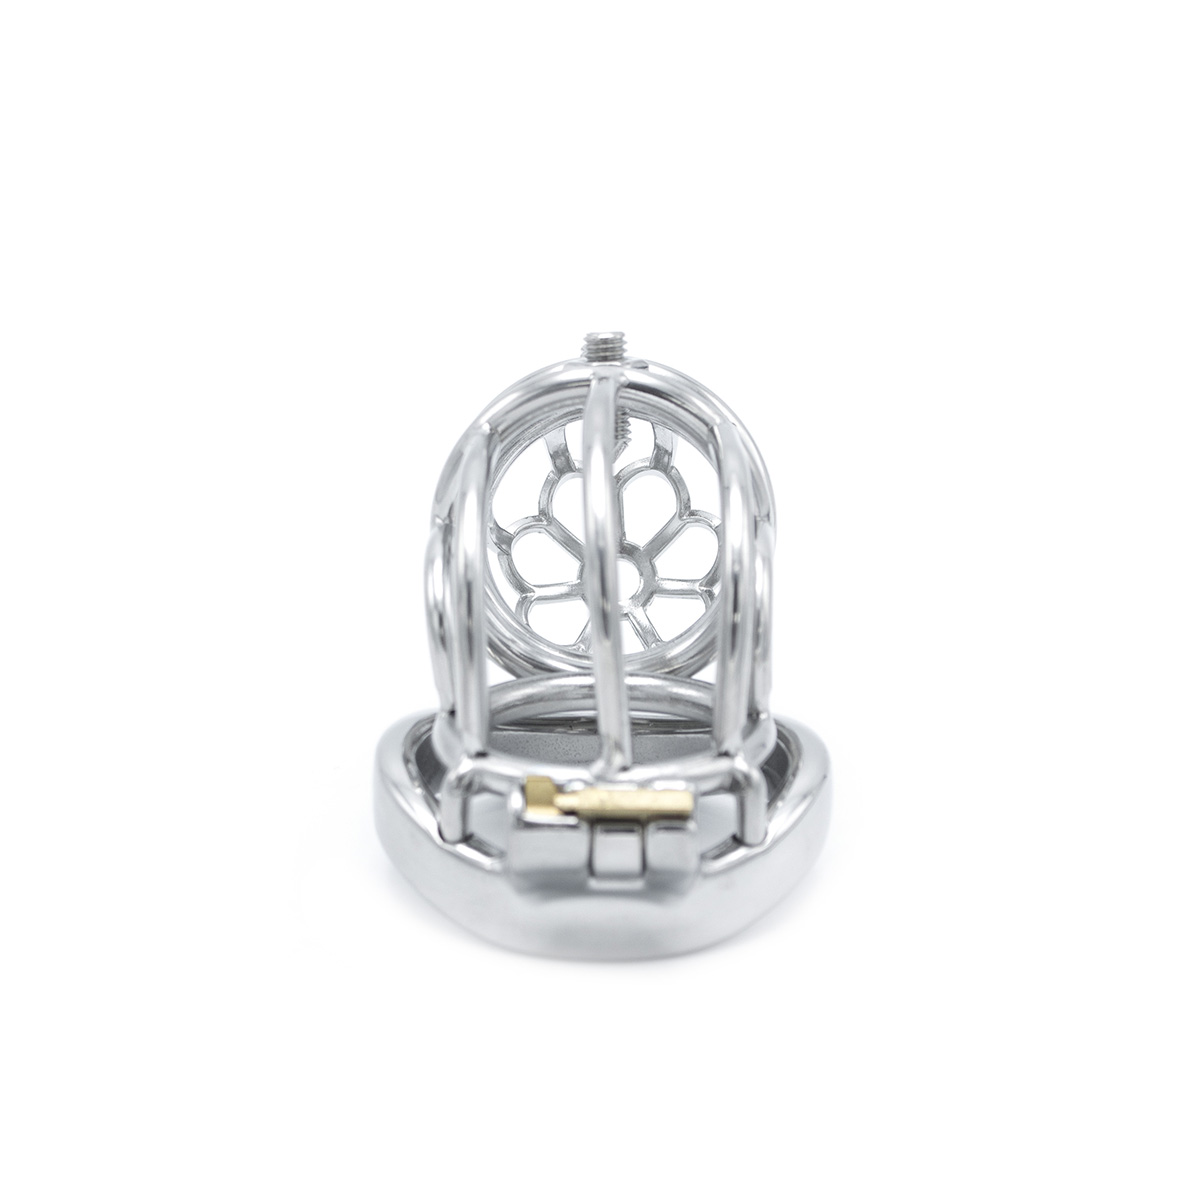 Cruve-Torture-Chastity-Device-OPR-278008-5